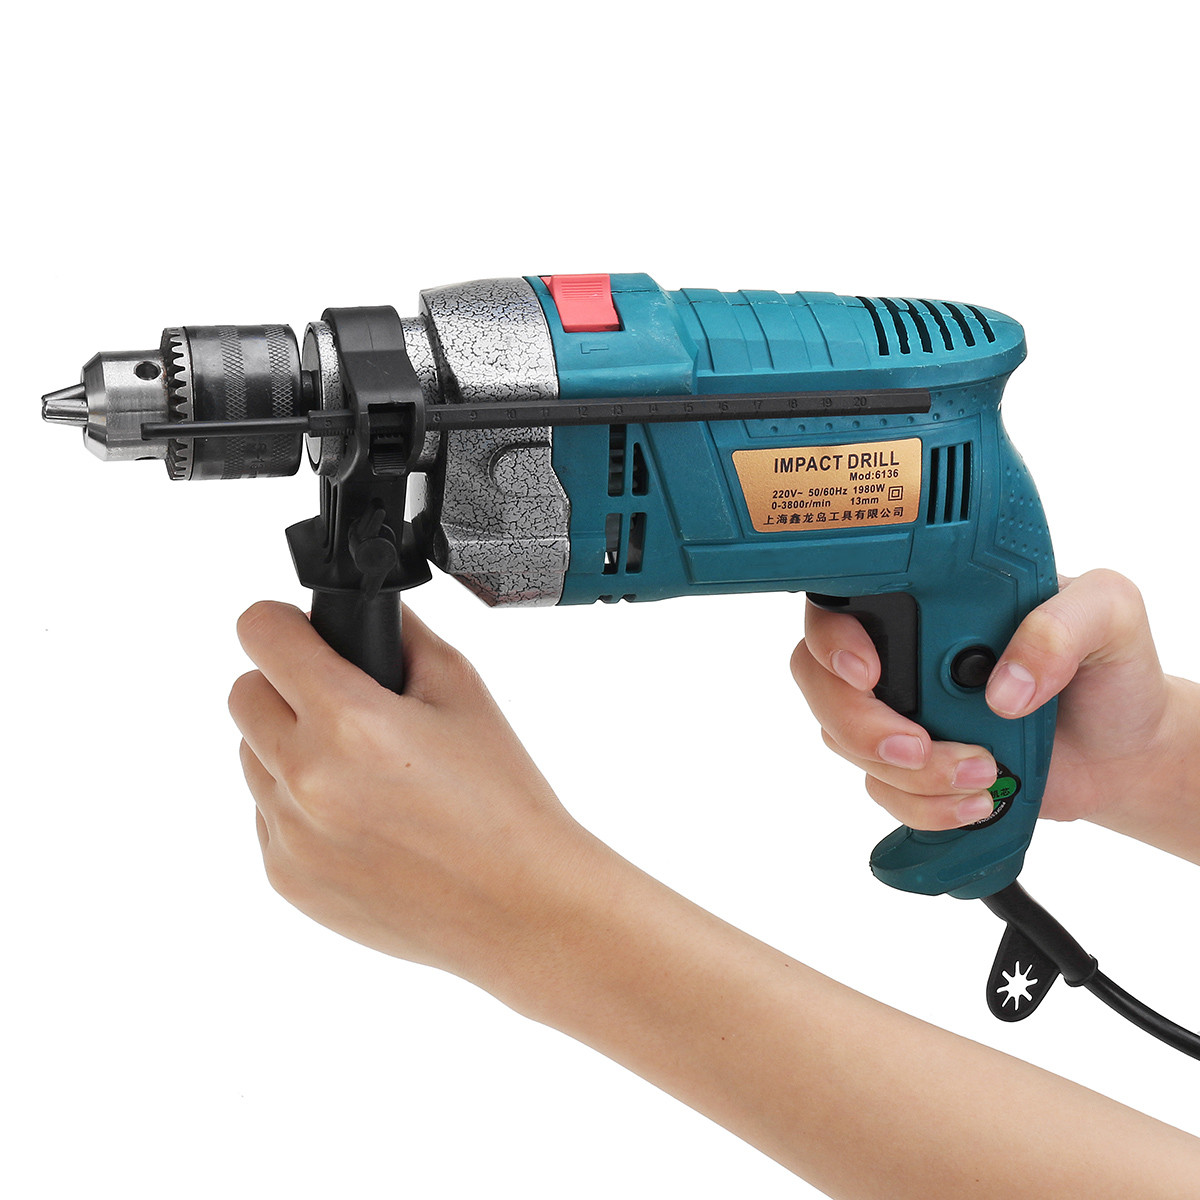 1980W-3800rpm-Electric-Impact-Drill-360deg-Rotary-Skid-Proof-Handle-With-Depth-Measuring-Scale-Spina-1715301-12